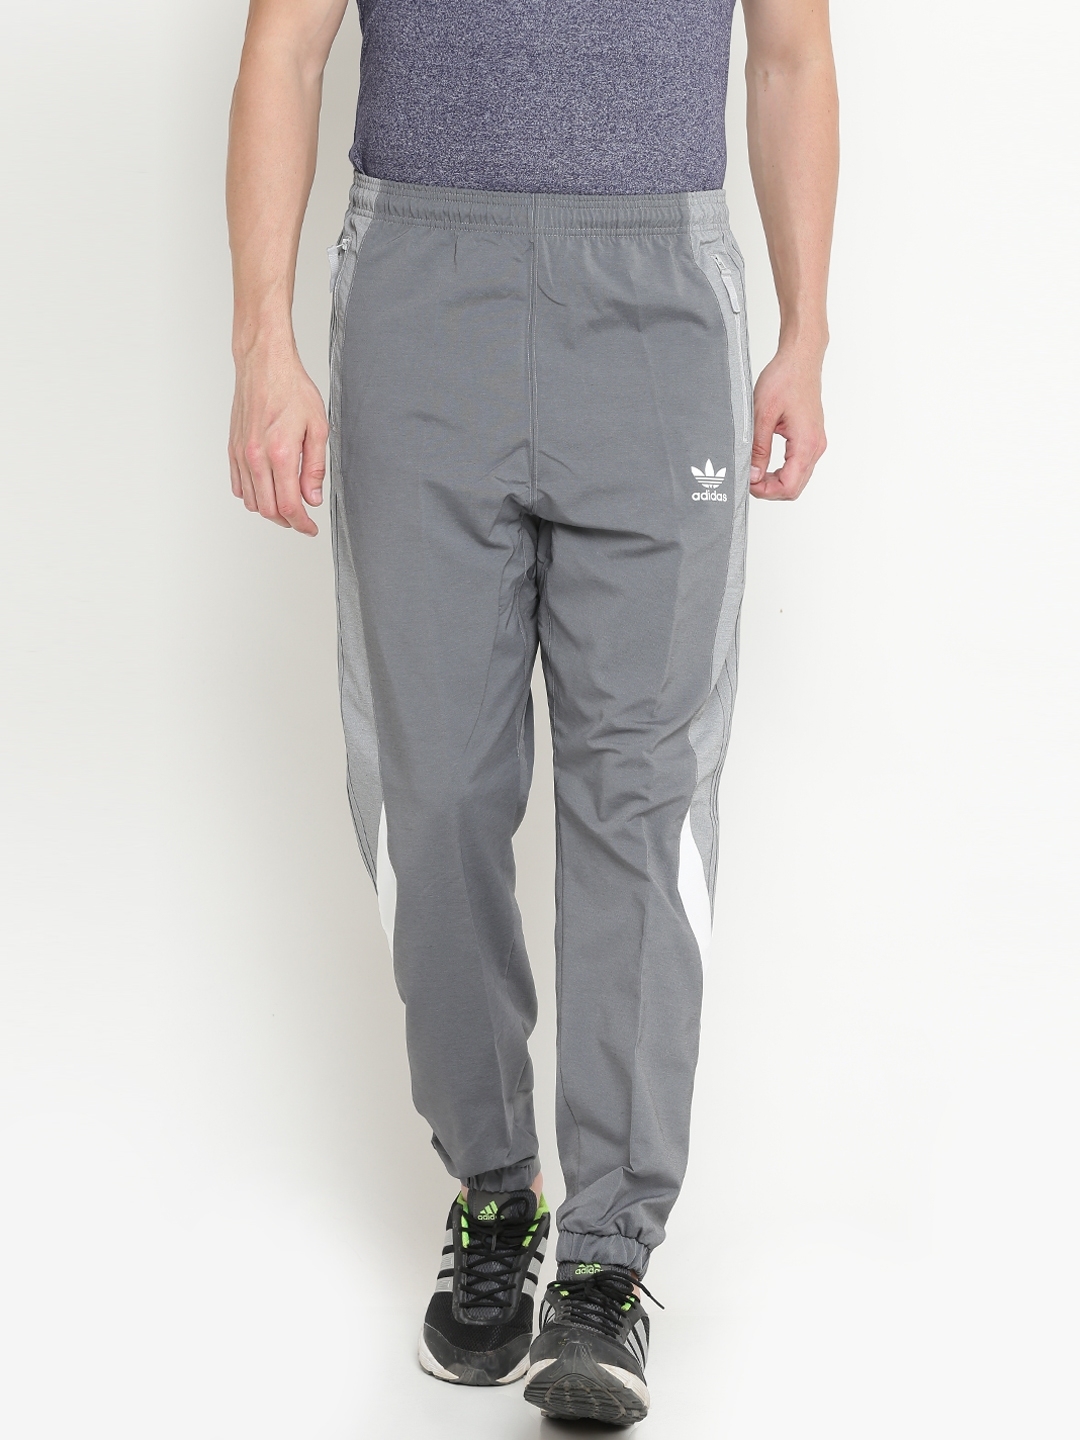 Pants  Original Mens ADIDAS NOVA WIND JOGGER PANTS CE2478 Size Medium was  listed for R69900 on 21 Mar at 1531 by Seal The Deal in Johannesburg  ID461650615